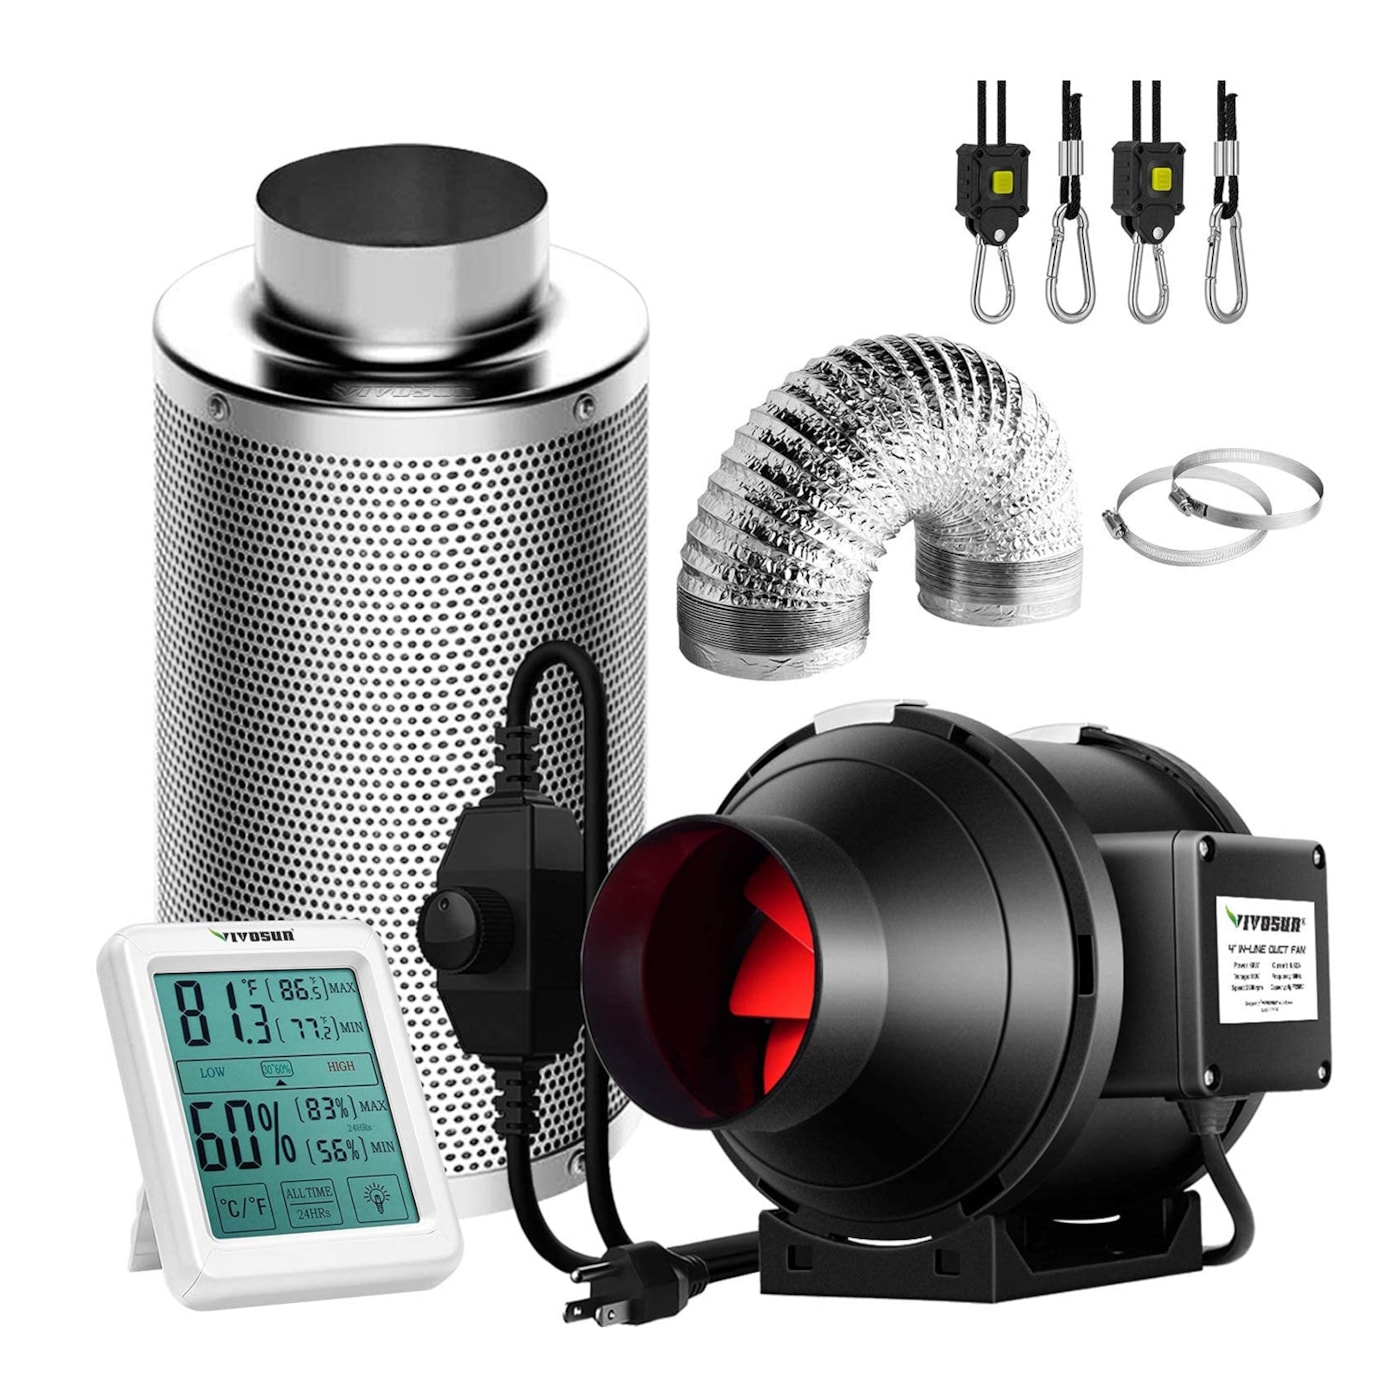 VIVOSUN 4-Inch 190 CFM Inline Duct Fan Kit with Carbon Filter, Thermometer, and Ducting